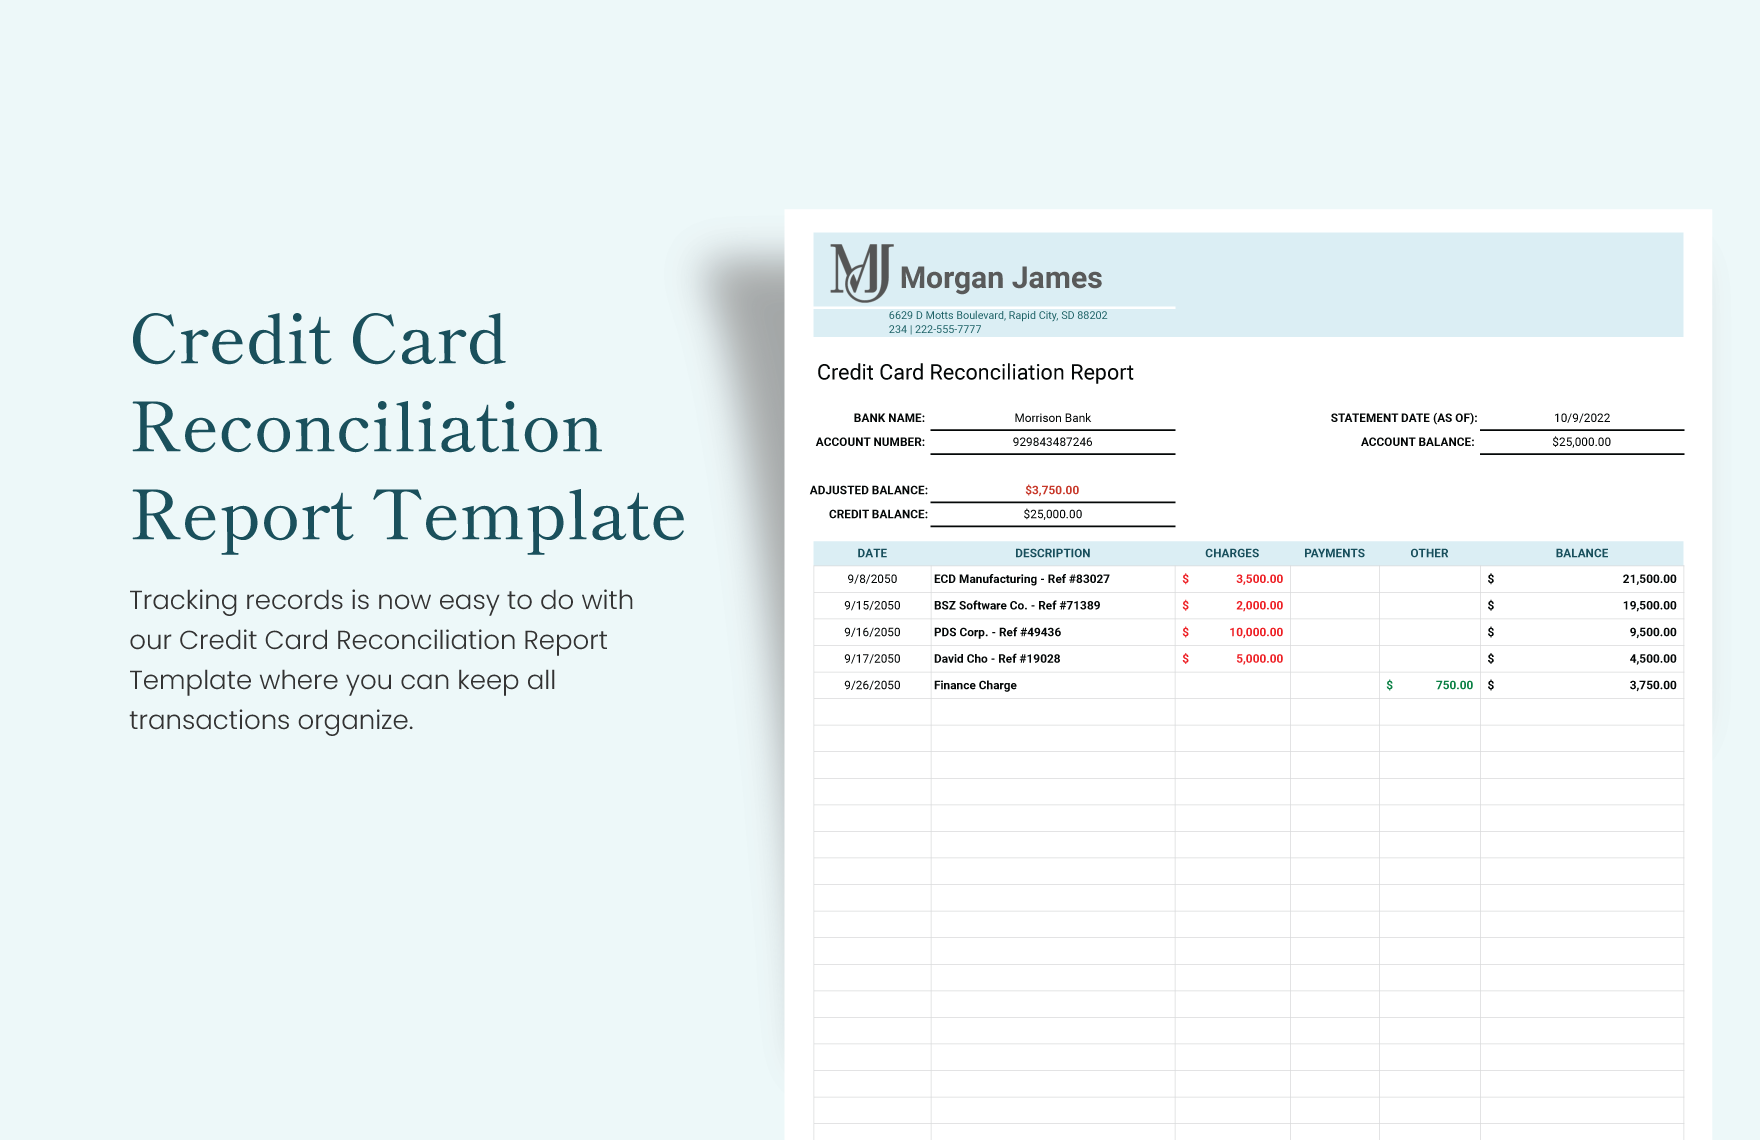 Credit Card Reconciliation Report Template